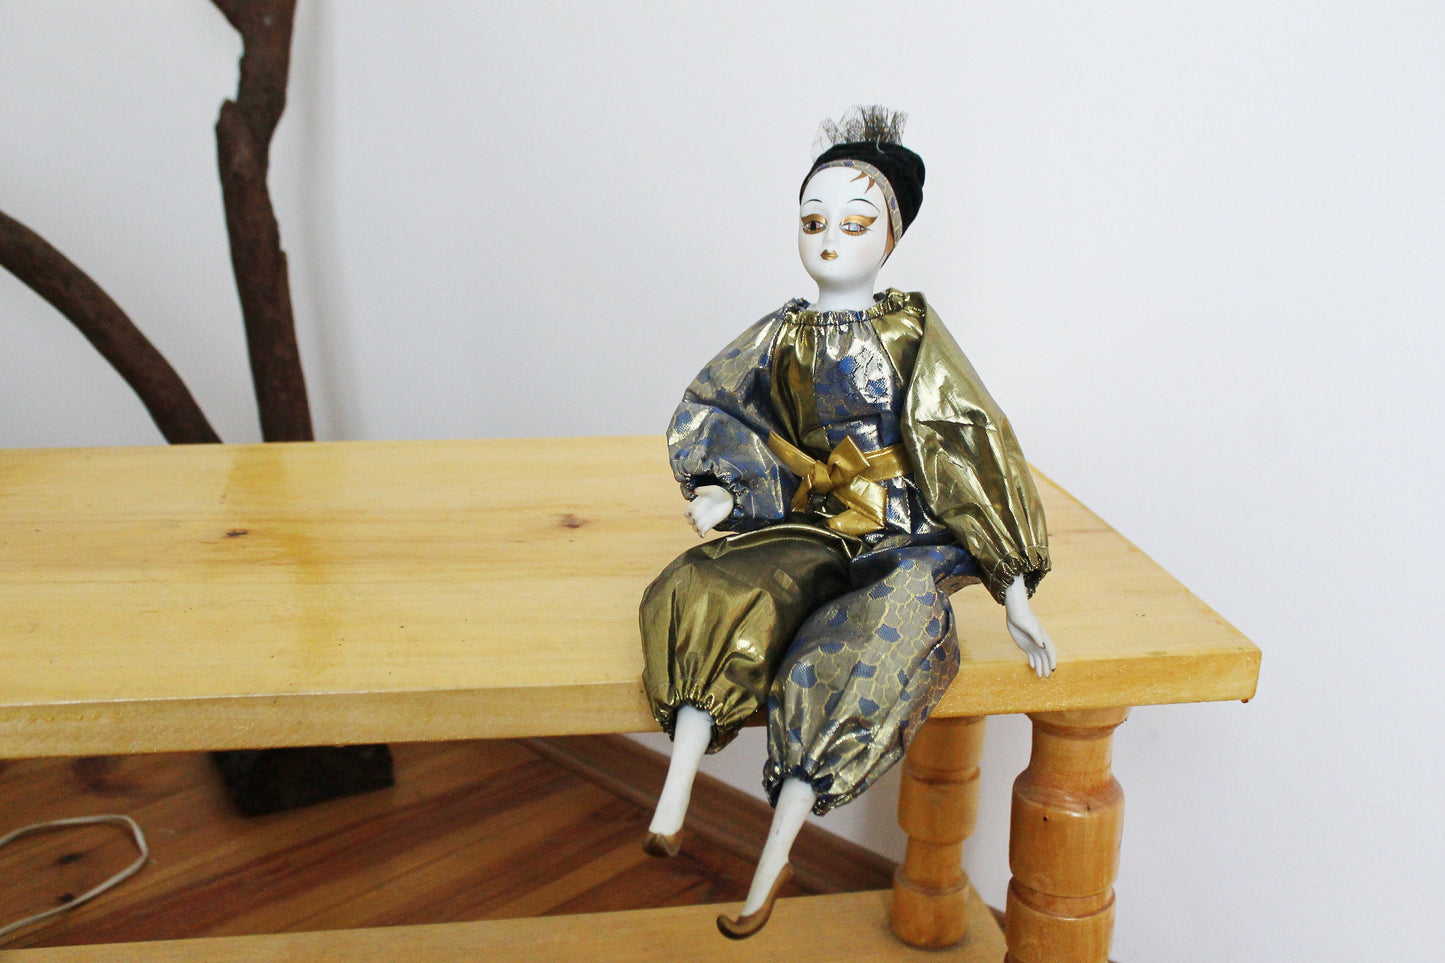 Vintage porcelain Venetian doll - Harlequin1 - 16 inches- collectible doll - porcelain doll - decor doll - 1980s